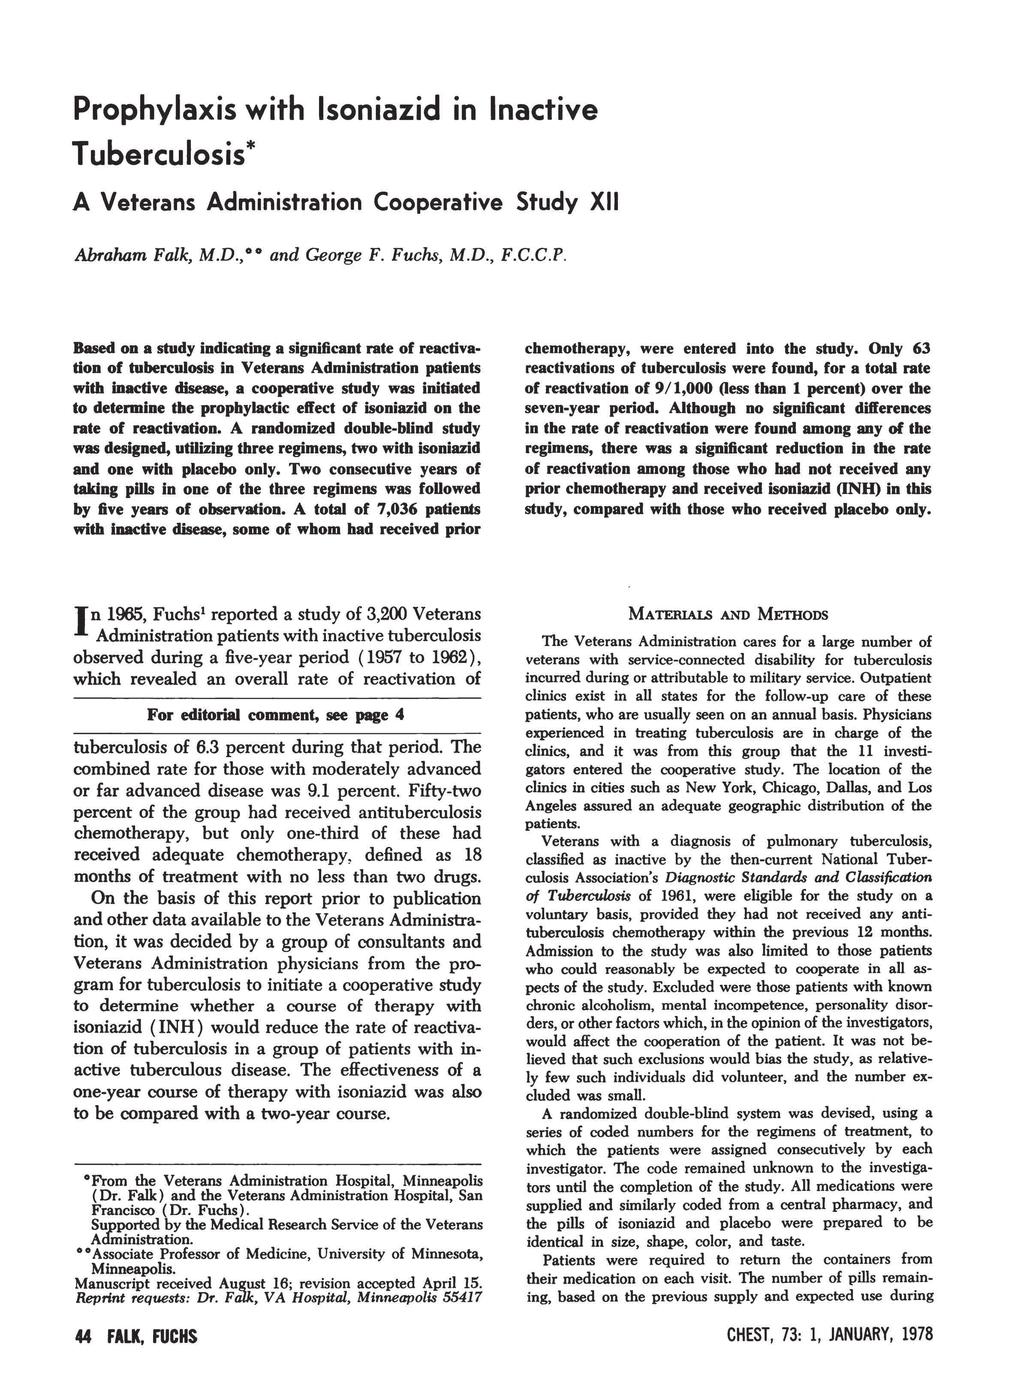 Prophylaxis with in Inactive Tuberculosis* A Veterans Administration Cooperative Study XII Abraham Falk, M.D., and George F. Fuchs, M.D., F.C.C.P. Based on a study indicating a significant rate of